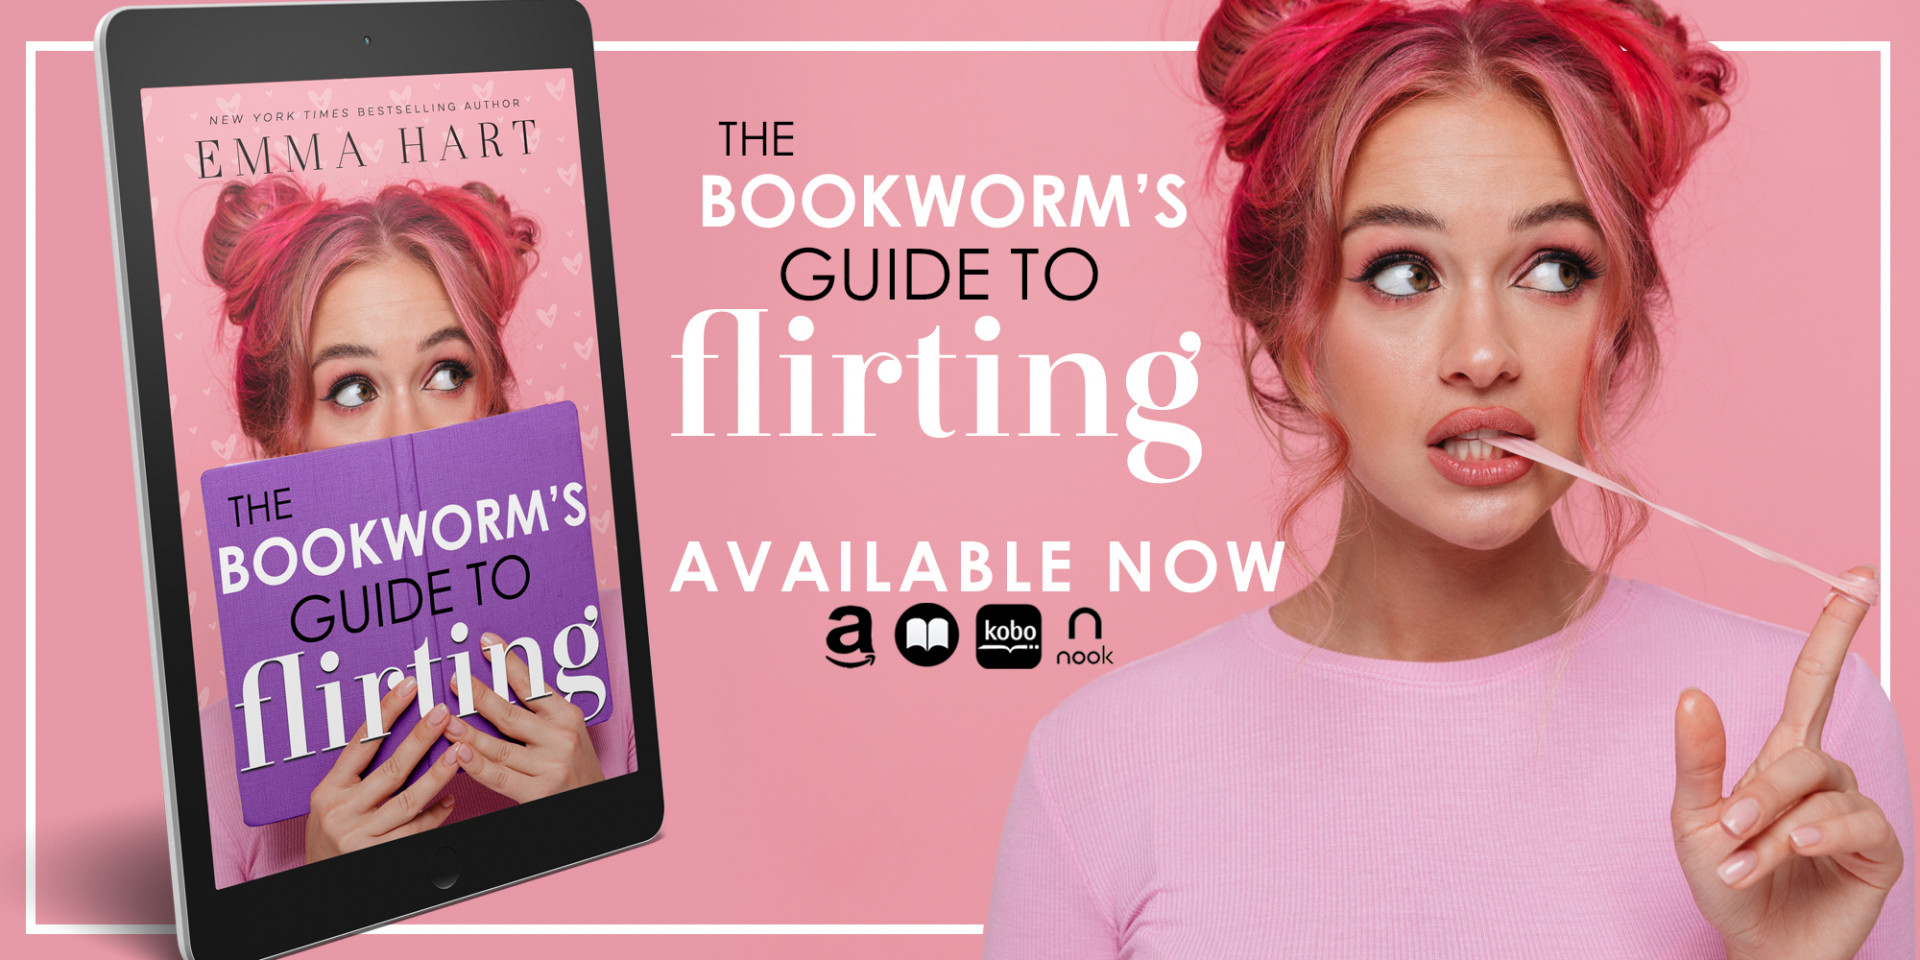 Review The Bookworm's Guide to Flirting by Emma Hart Jo Reads Romance